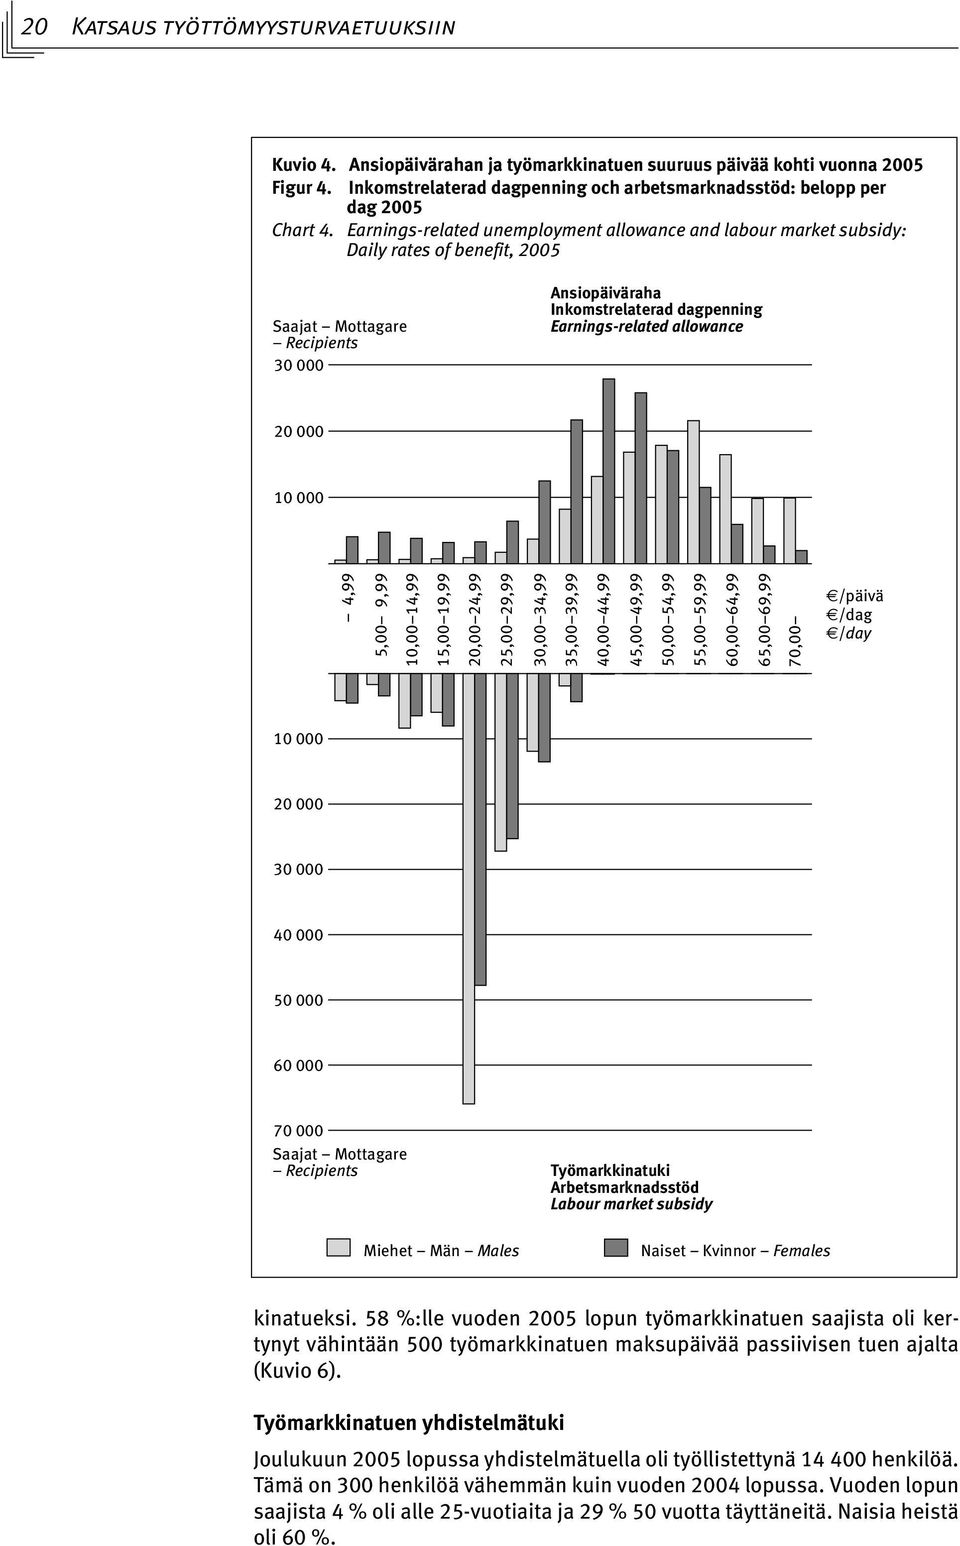 Earnings-related unemployment allowance and labour market subsidy: Daily rates of benefit, 2005 Saajat Mottagare Recipients 30 000 Ansiopäiväraha Inkomstrelaterad dagpenning Earnings-related